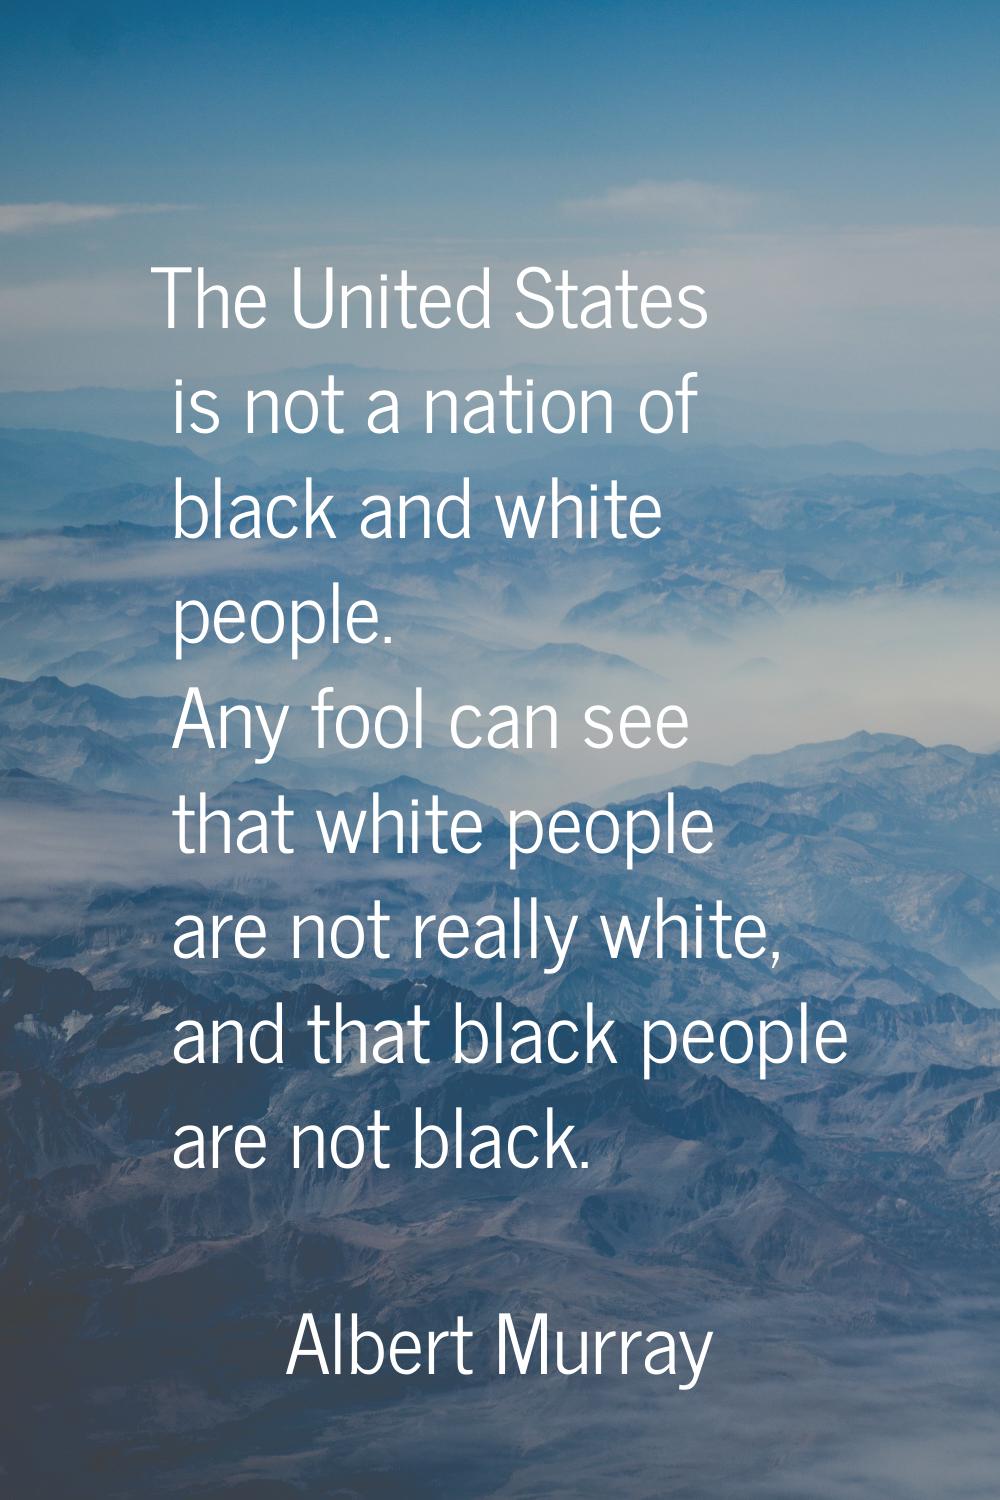 The United States is not a nation of black and white people. Any fool can see that white people are